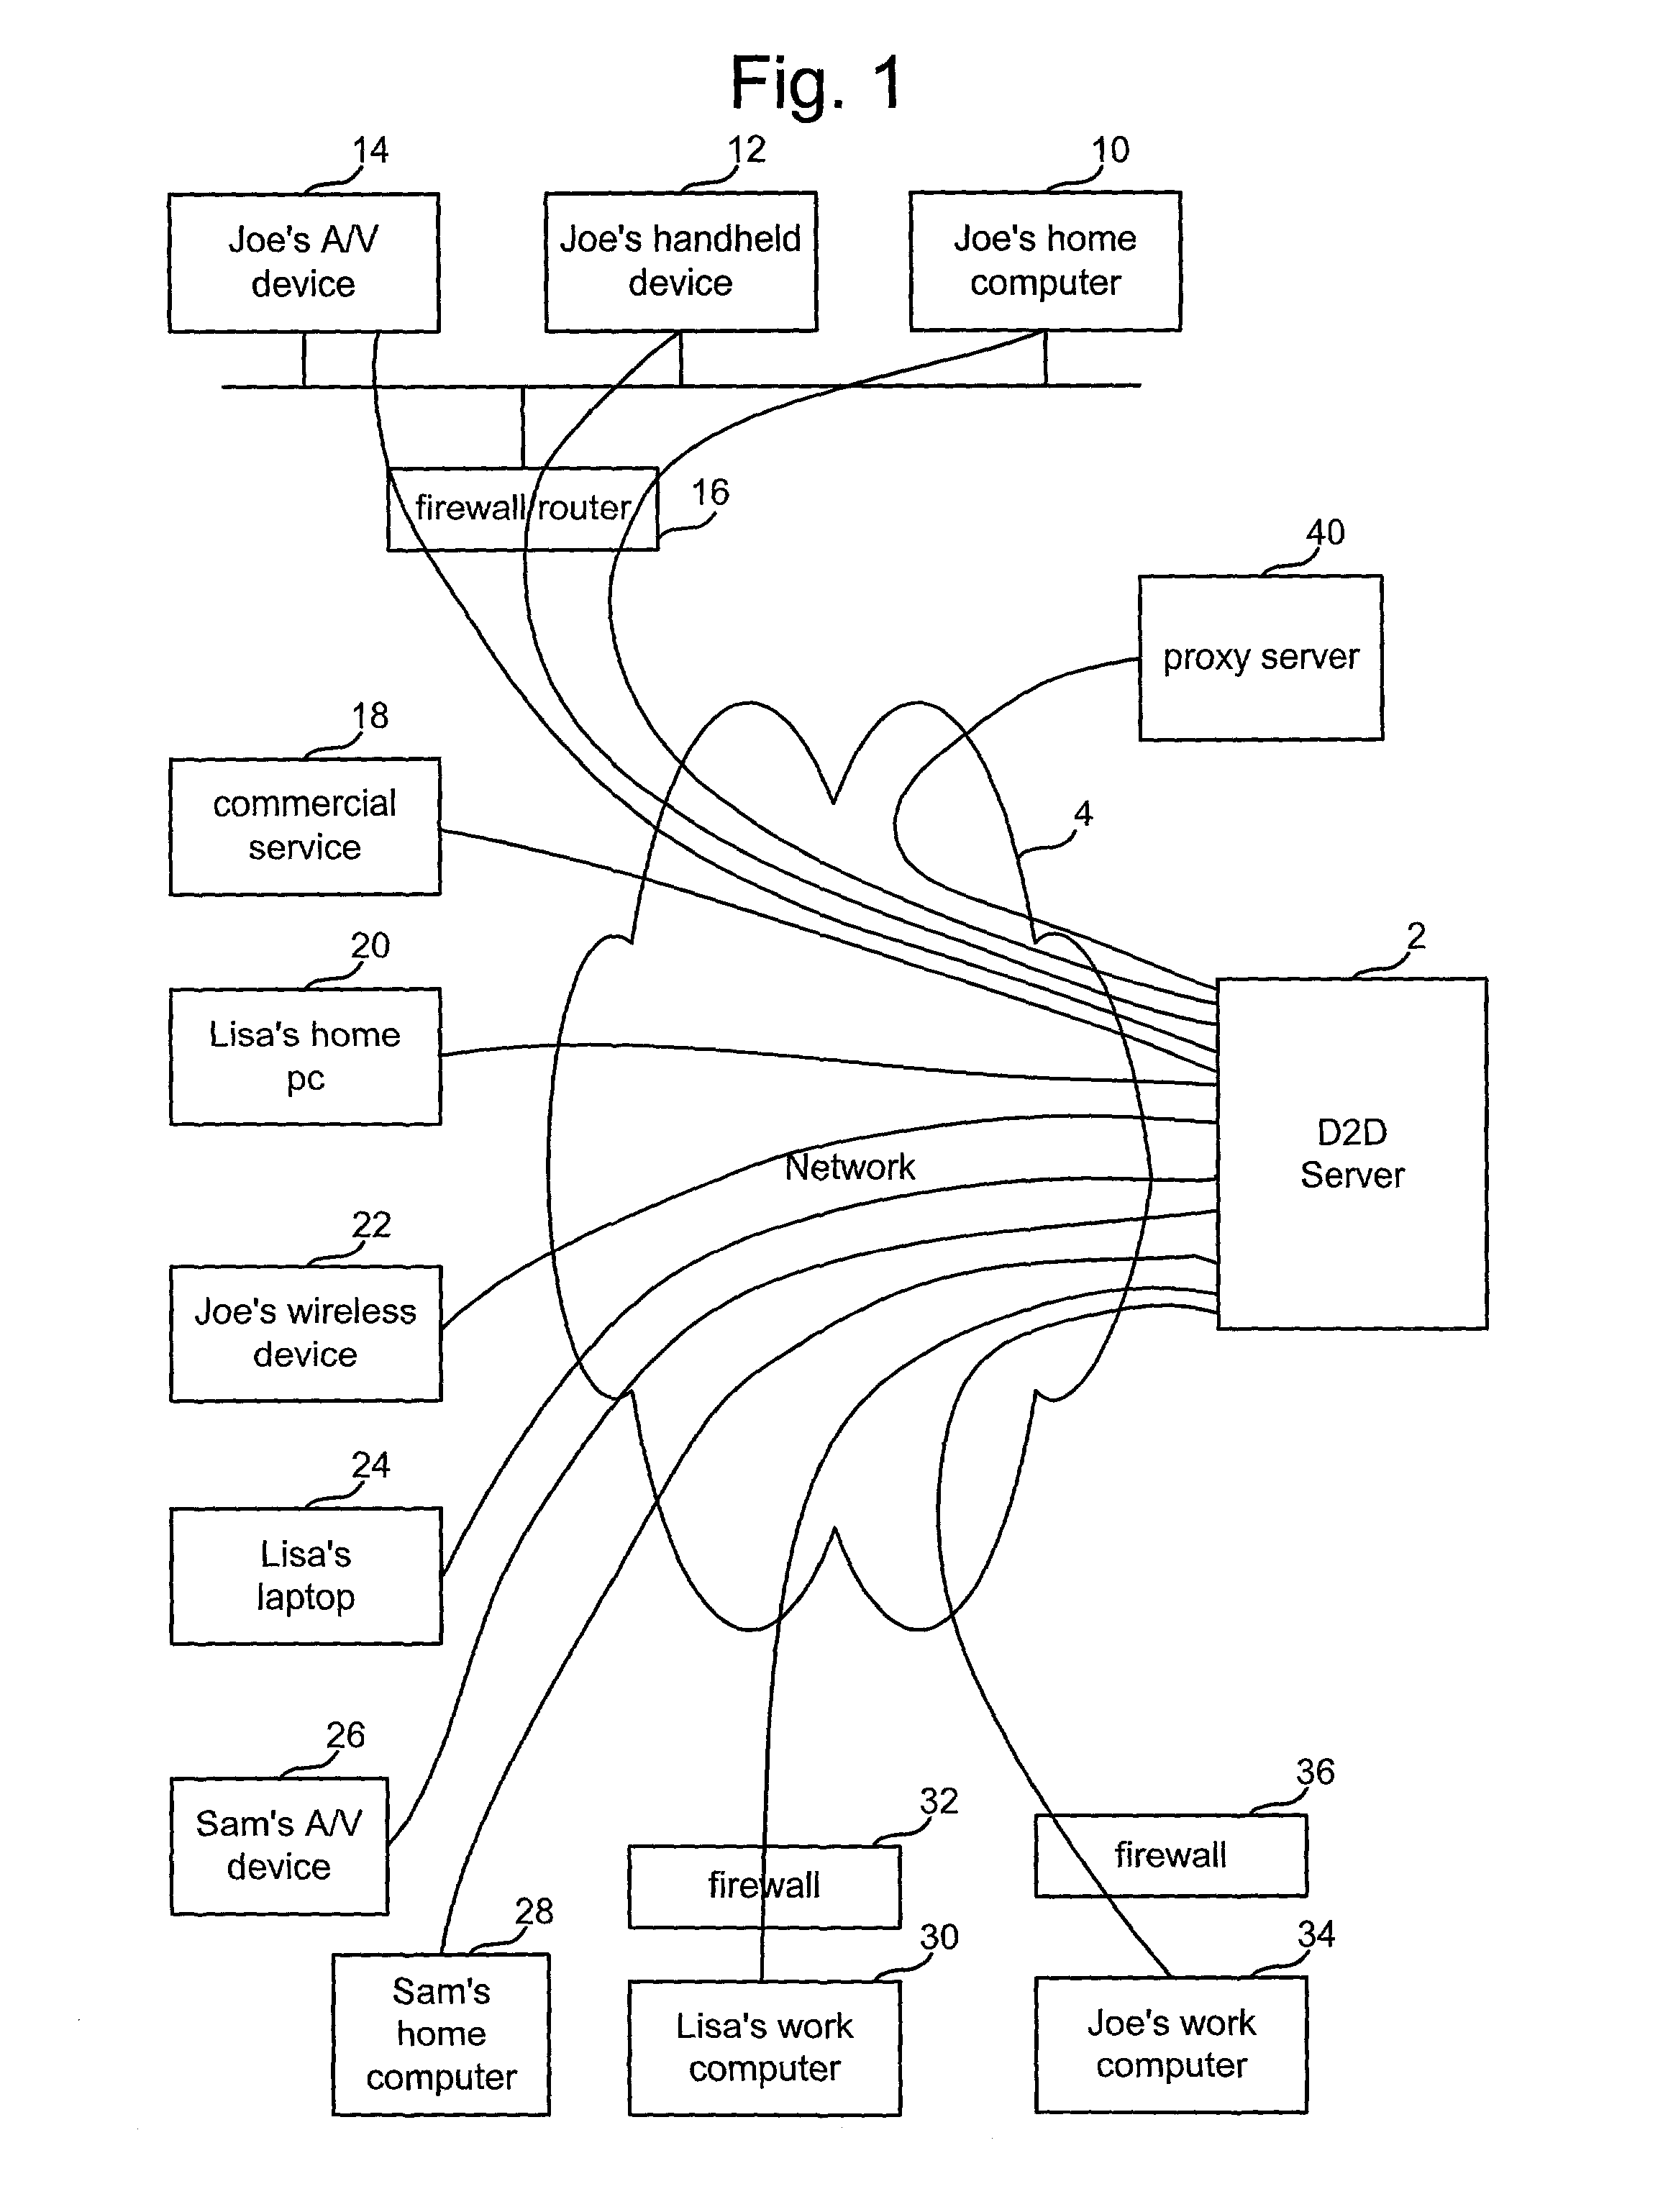 Device-to-device network